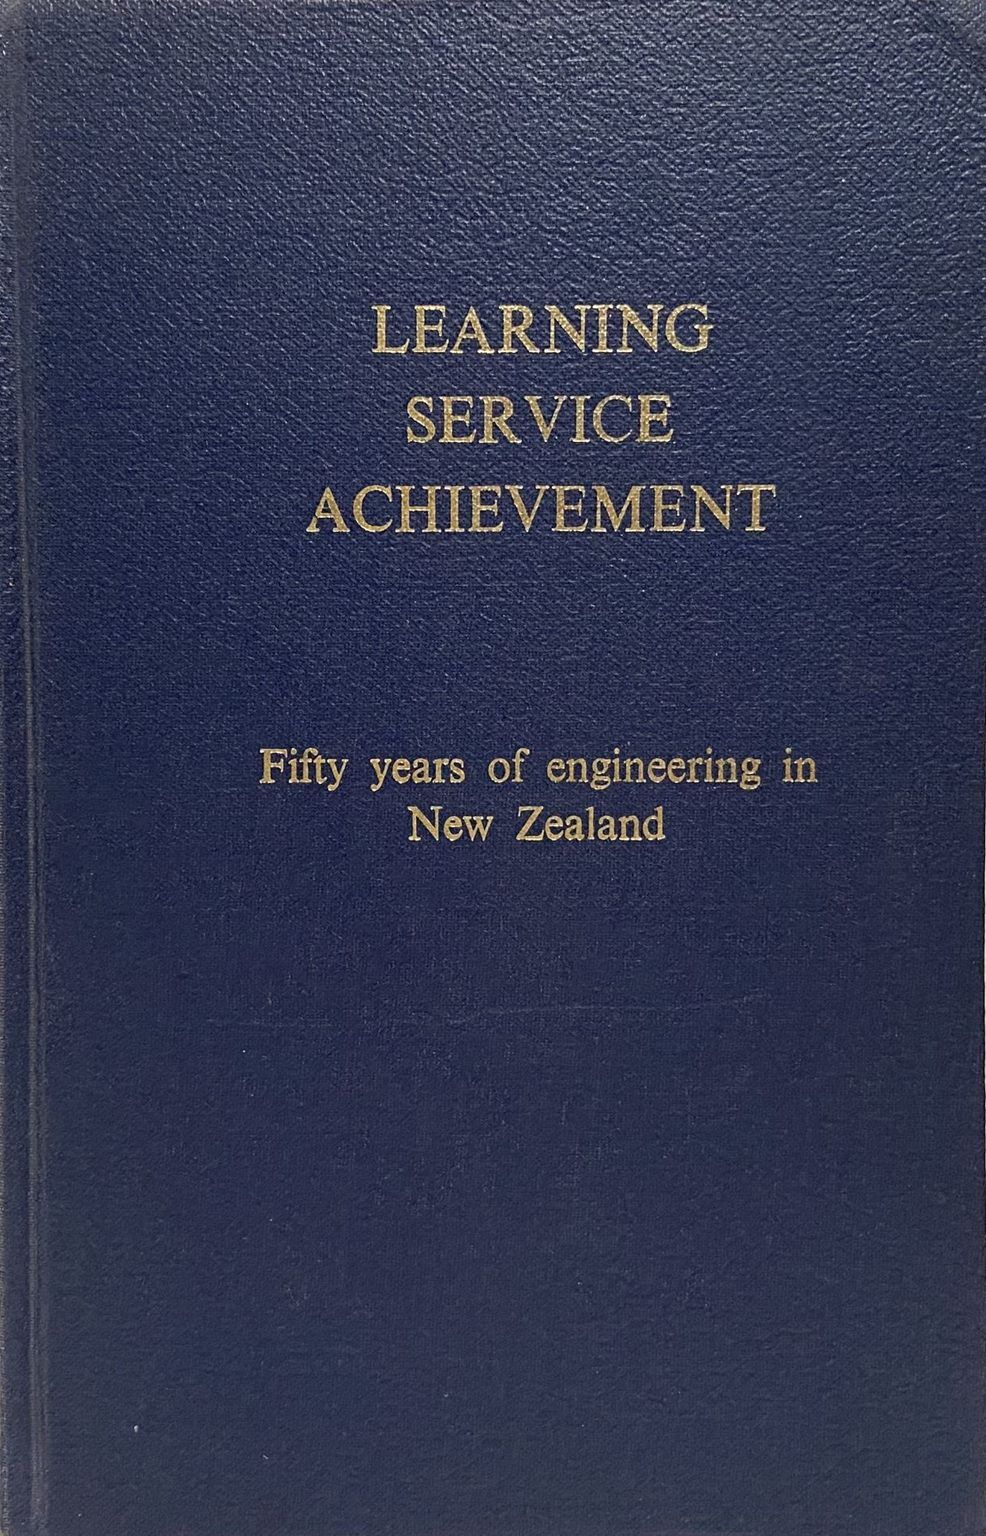 LEARNING SERVICE ACHIEVEMENT: 50 Years of Engineering in New Zealand